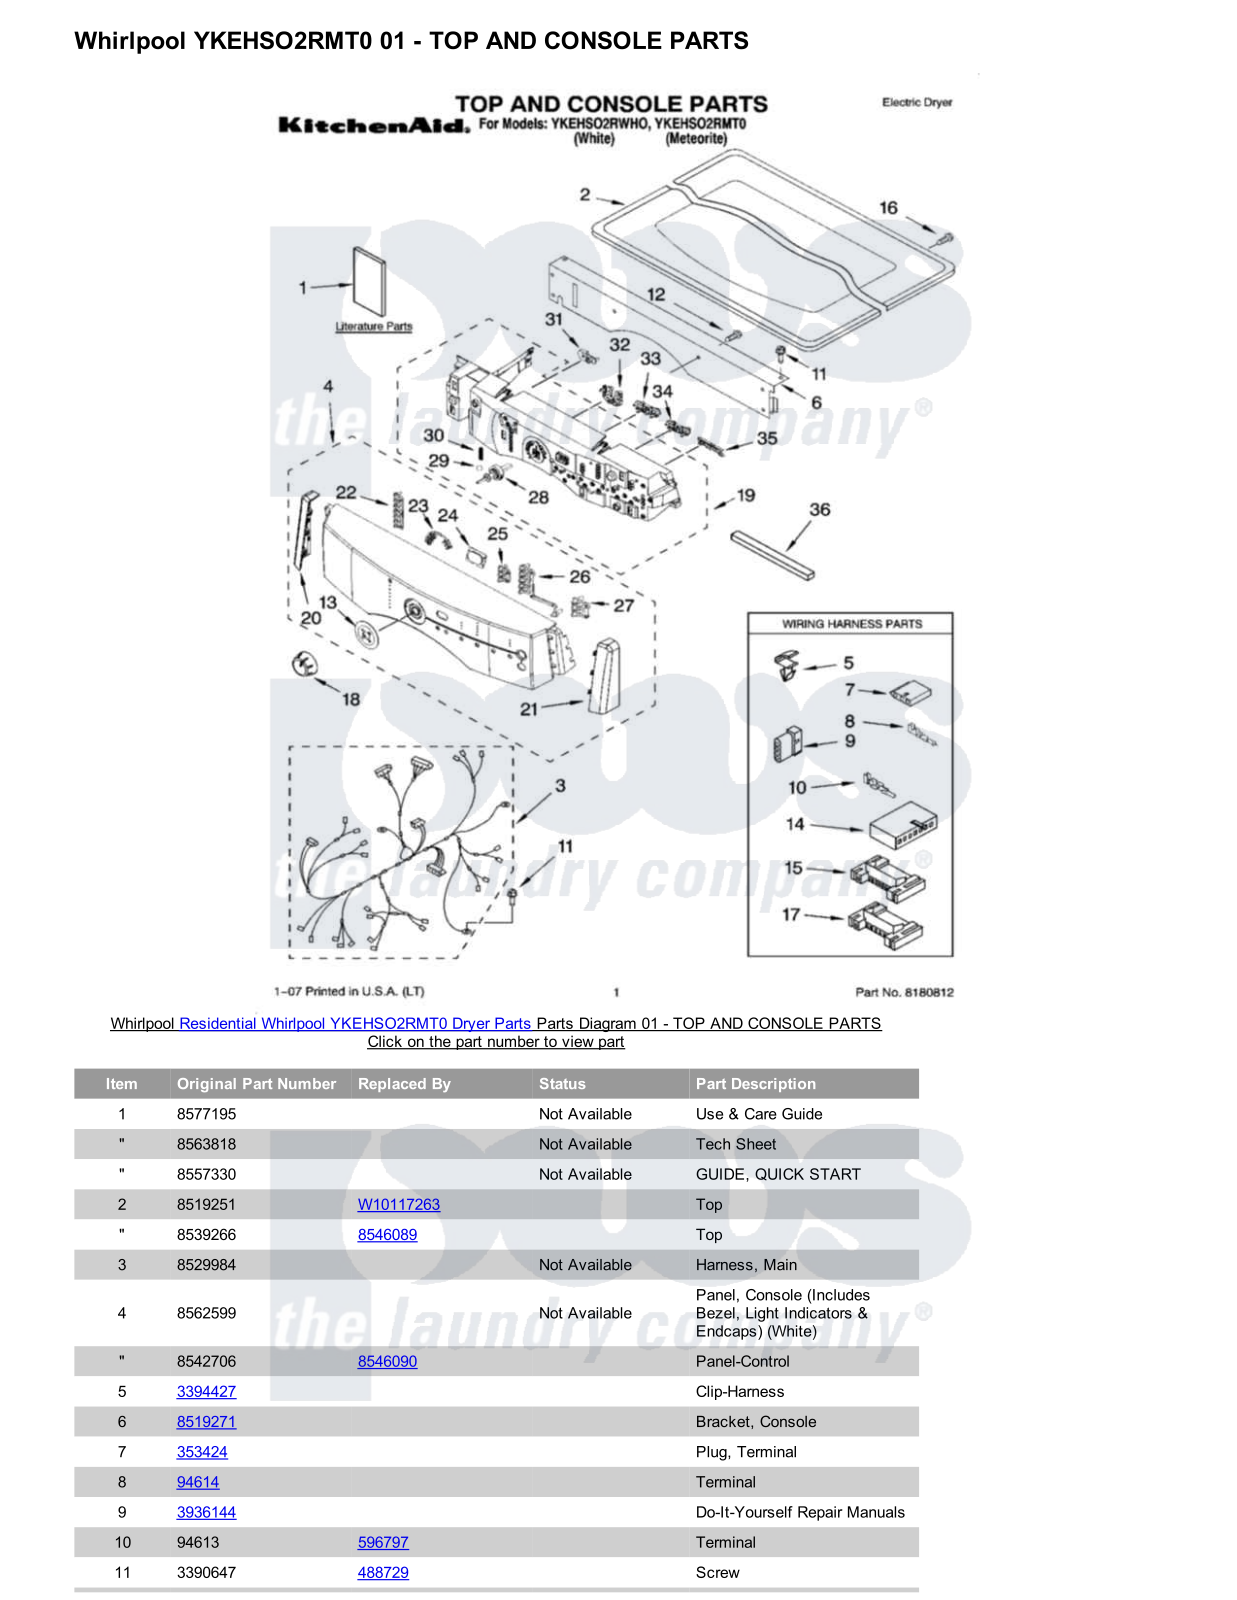 Whirlpool YKEHSO2RMT0 Parts Diagram